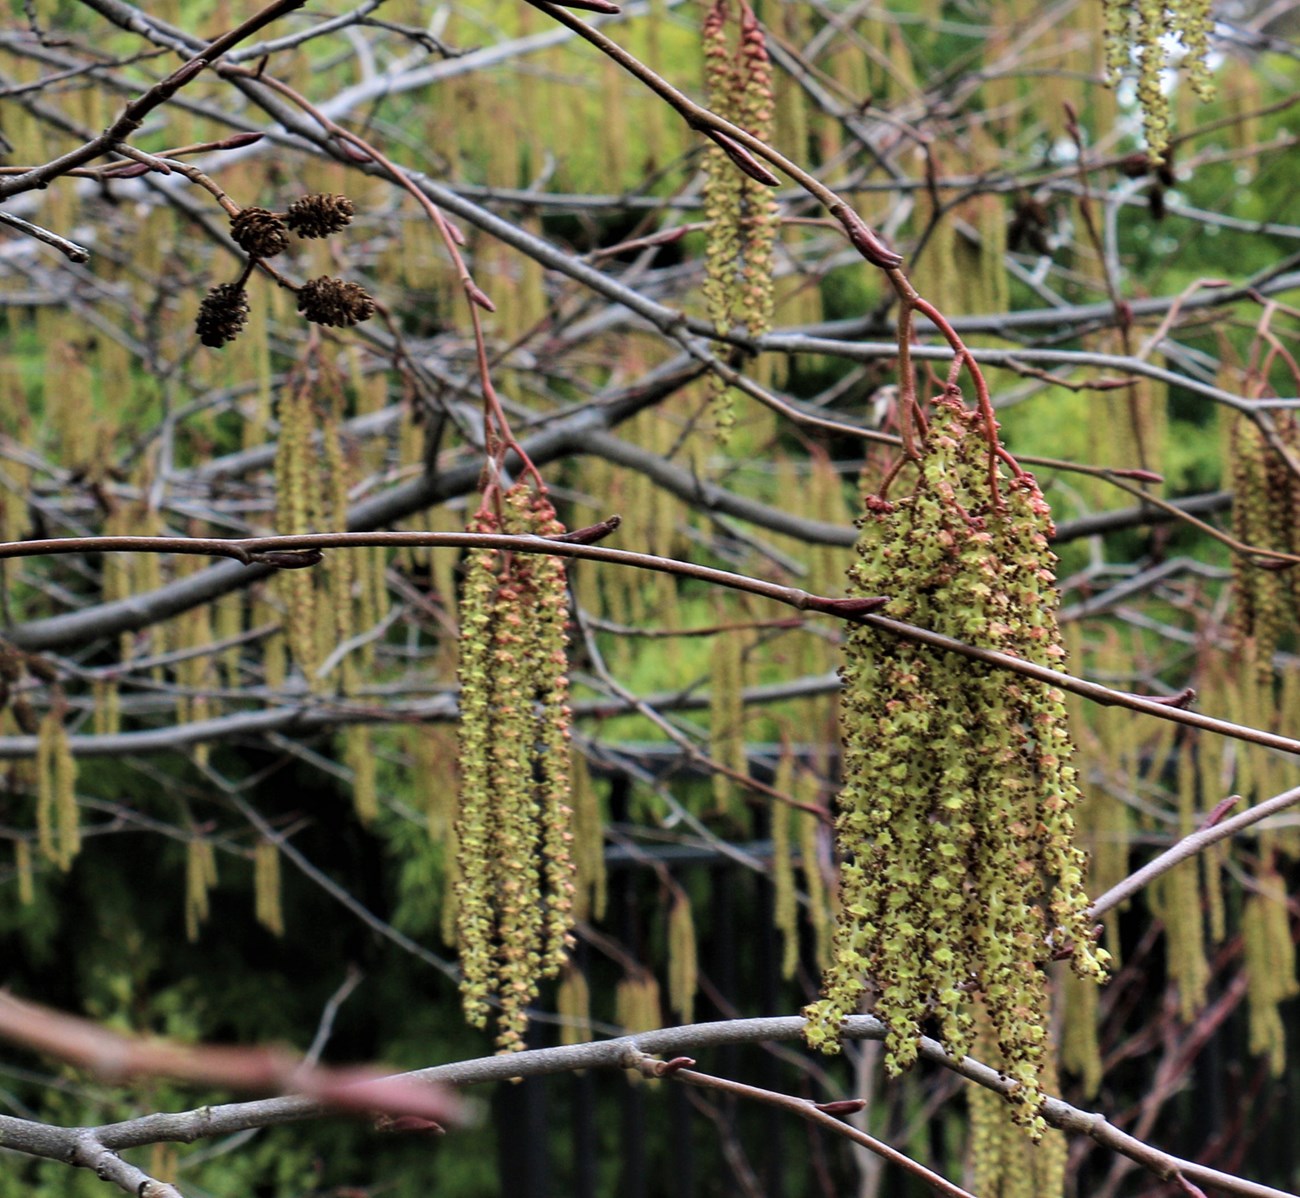 Close up of long, drooping yellowish male catkin clusters and a few small, round, brown, cone-like female catkins on tree branches.